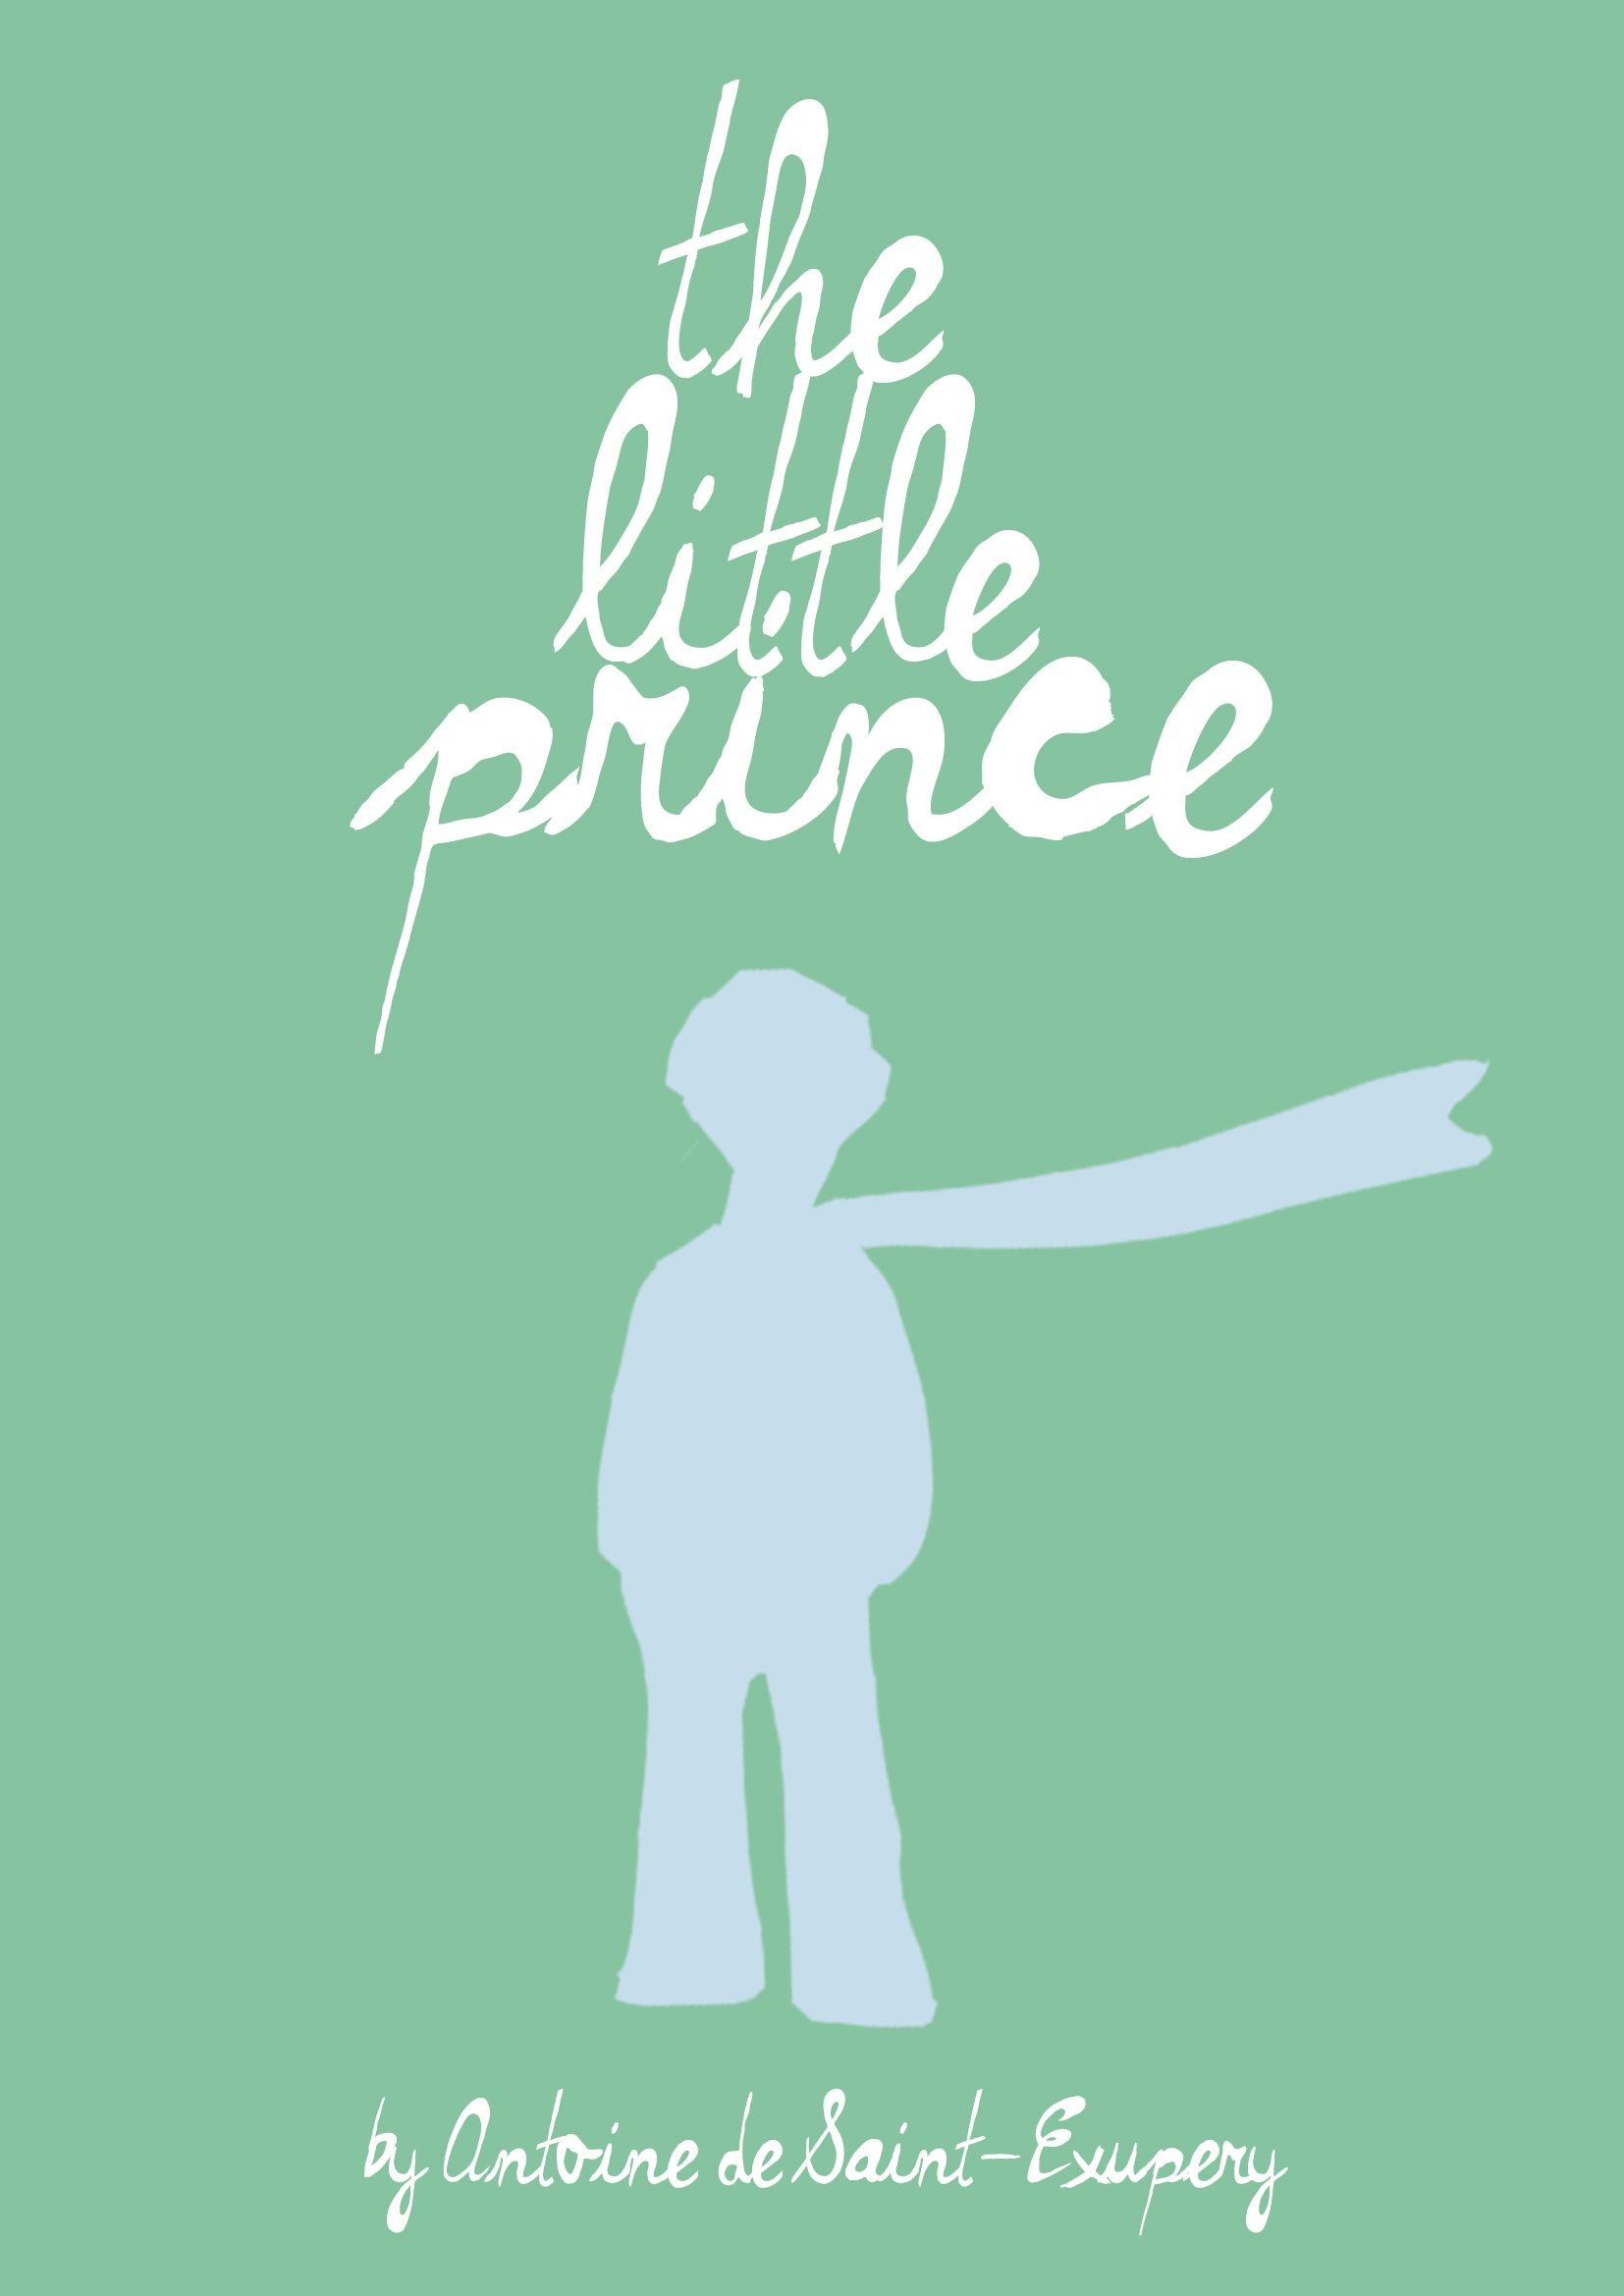 The Little Prince: Where Are You, Fox? - By Antoine De Saint-exupéry (board  Book) : Target